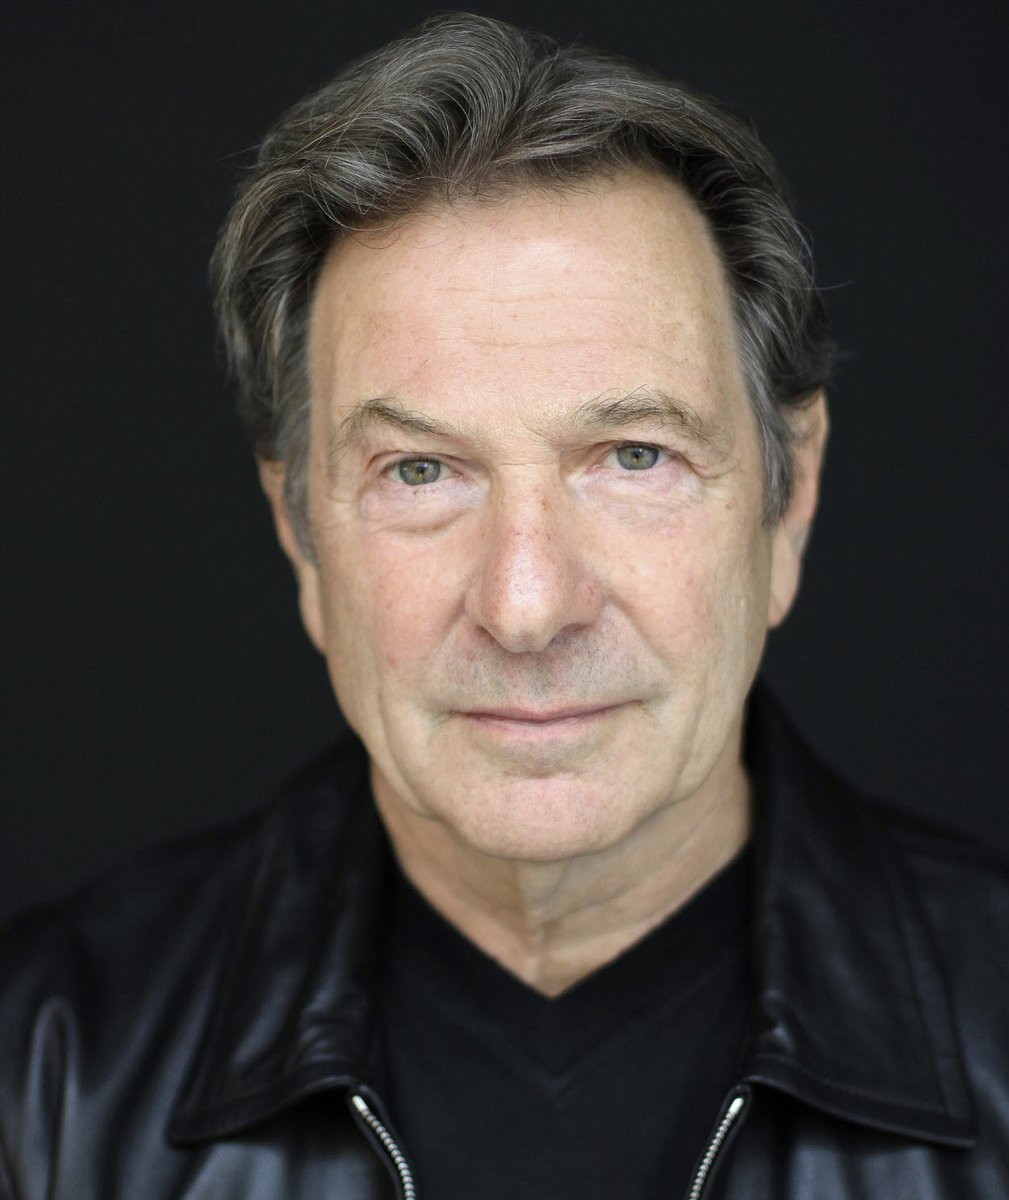 🎉HAPPY BIRTHDAY🎉 Michael Brandon Michael Brandon voiced one of the Skeleton Gladiators in Scooby-Doo and the Cyber Chase. #ScoobyDoo #MichaelBrandon